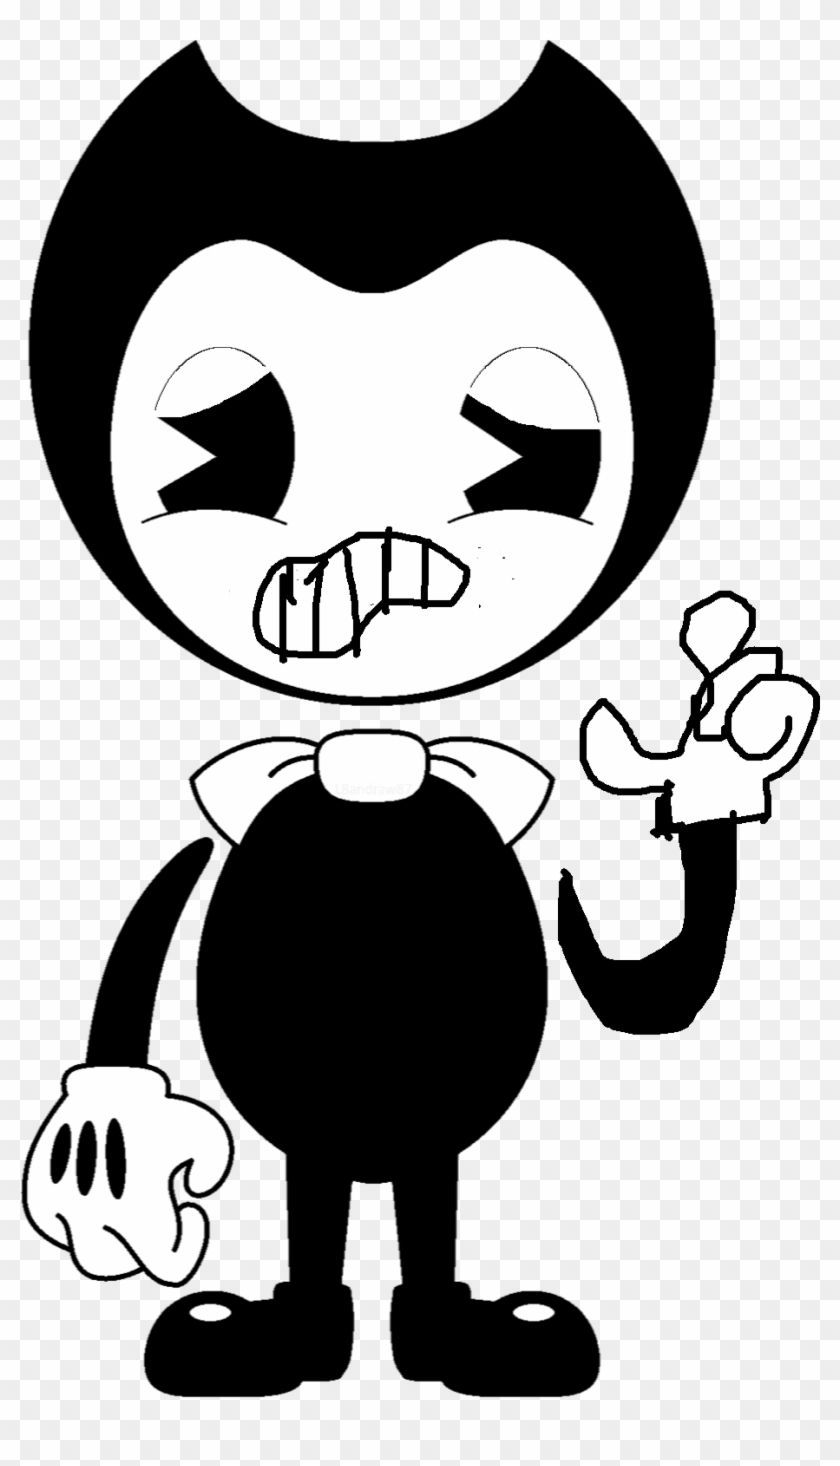 Bendy Fenger Snap - Bendy And The Ink Machine Clipart #2625605